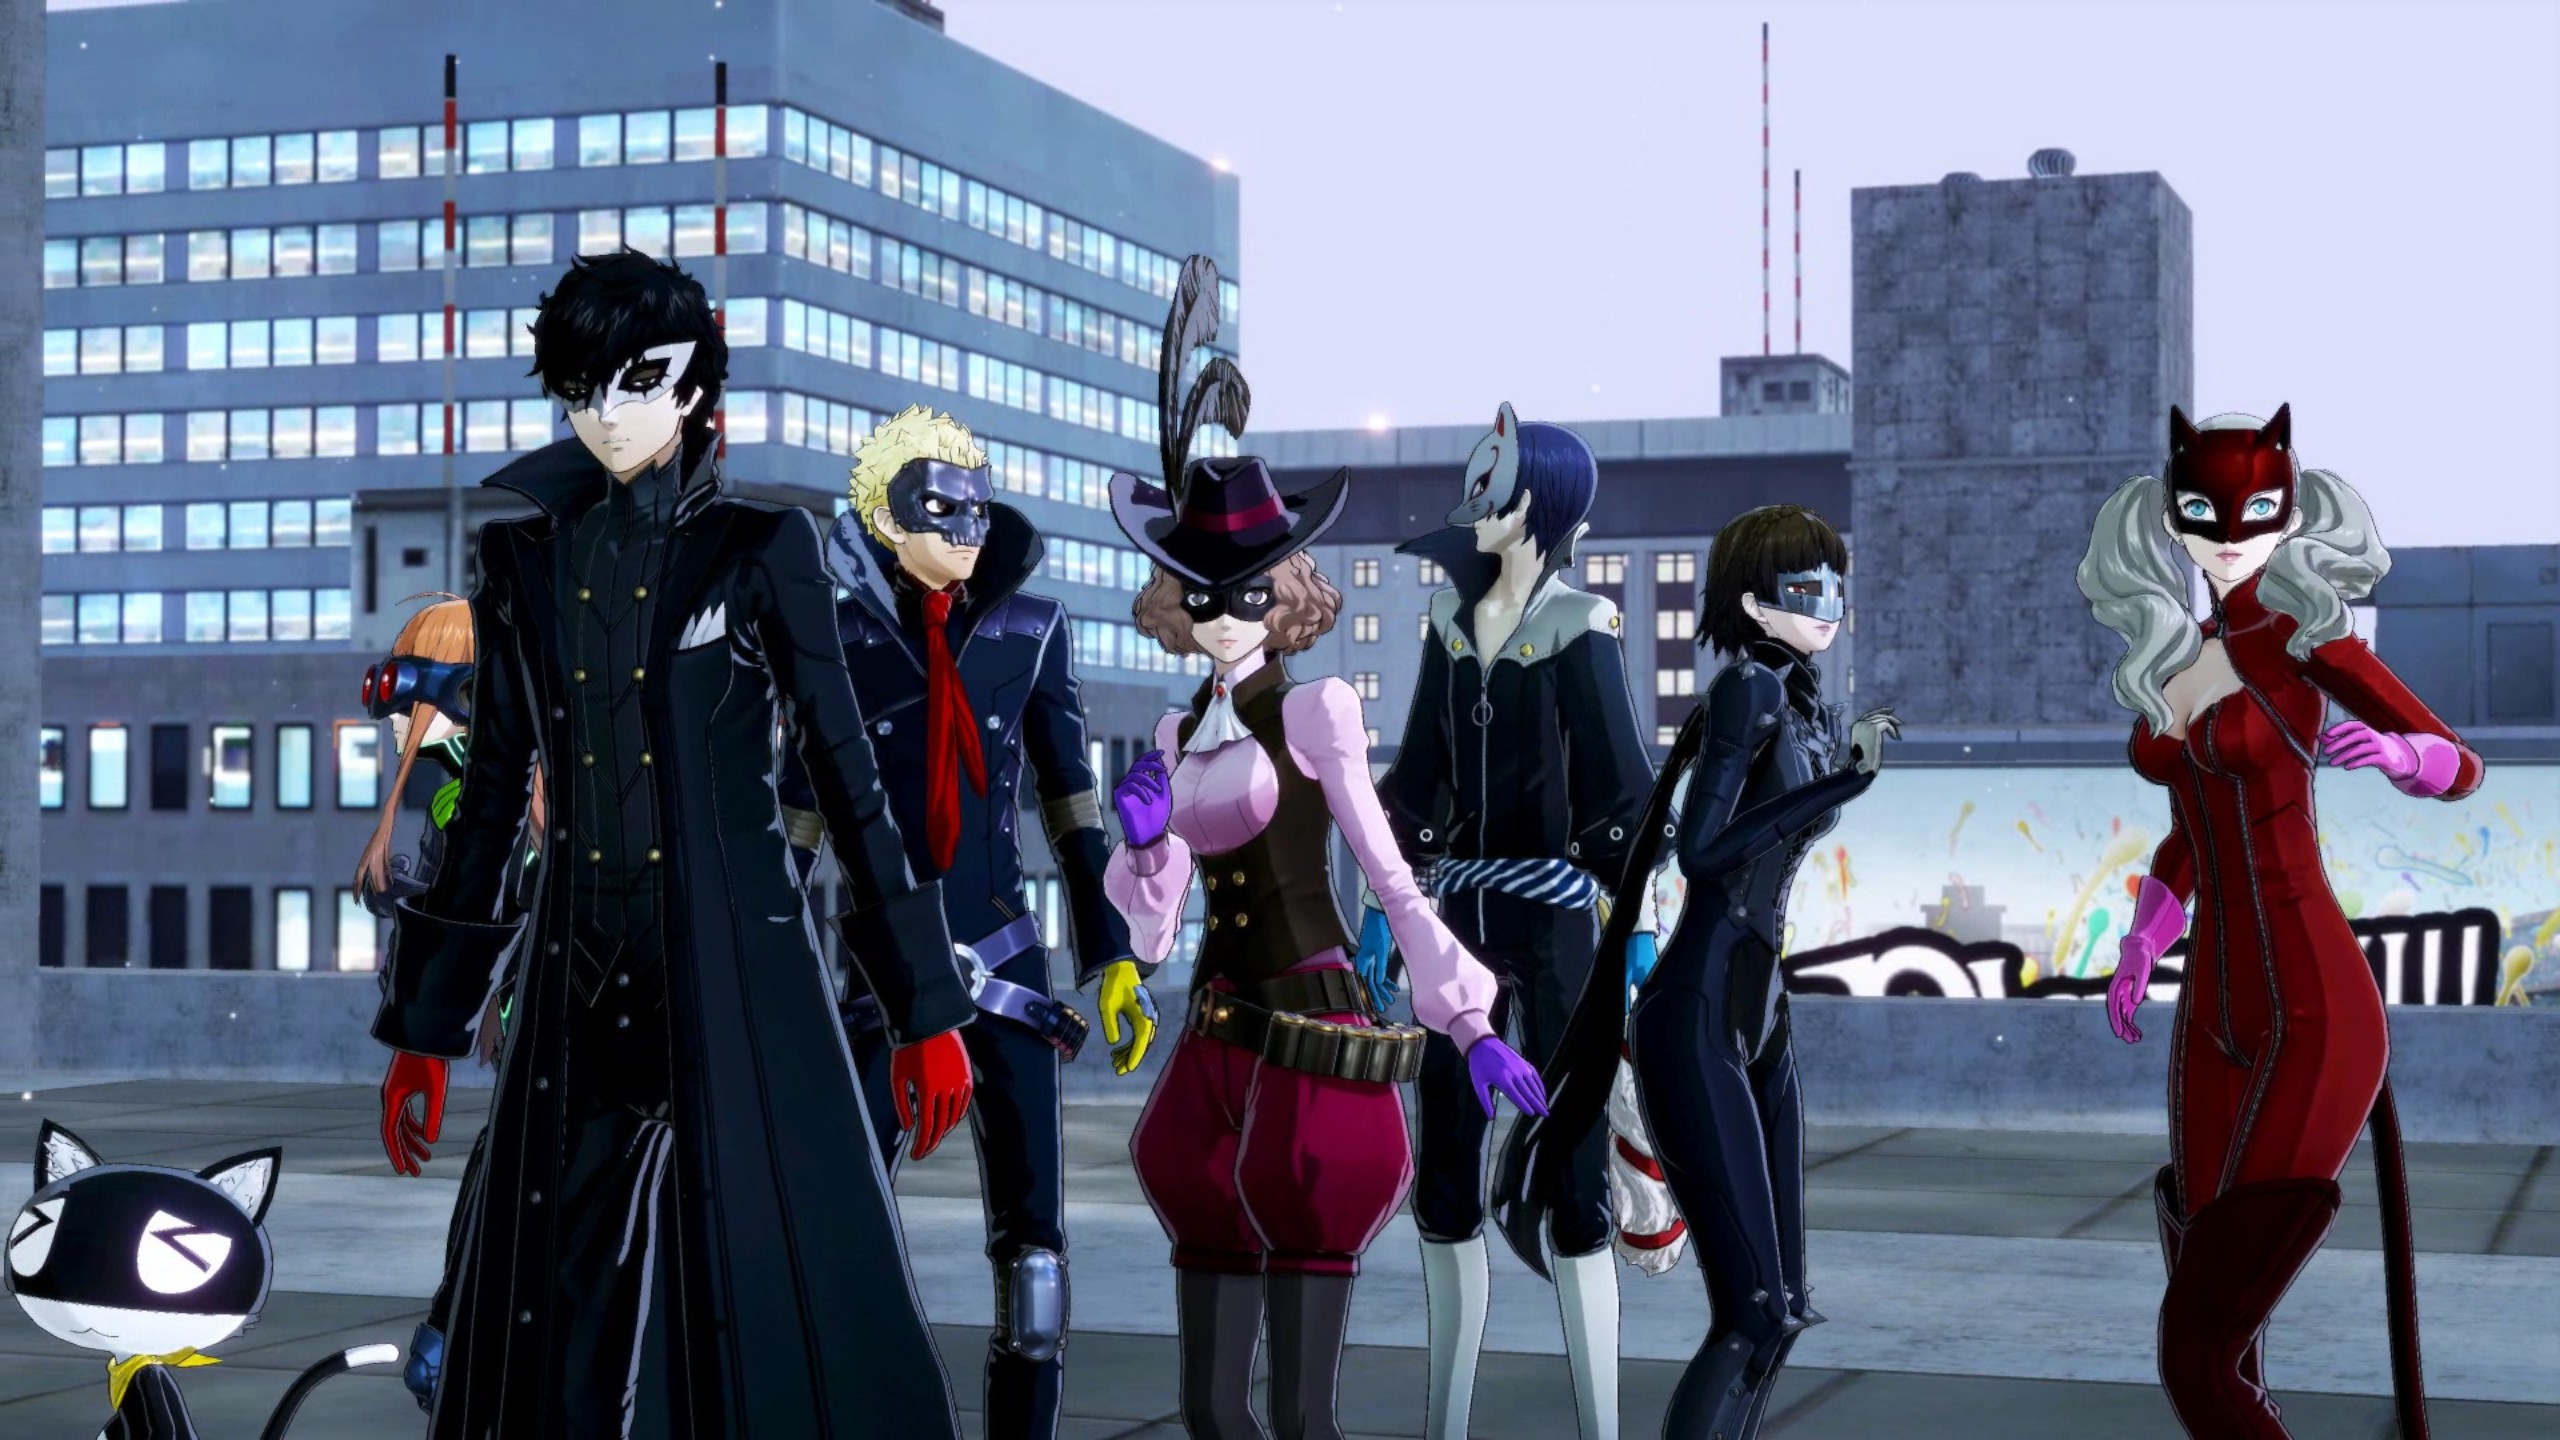 Persona 5 Royal: New Game + - What Carries Over and How to Start New Game +